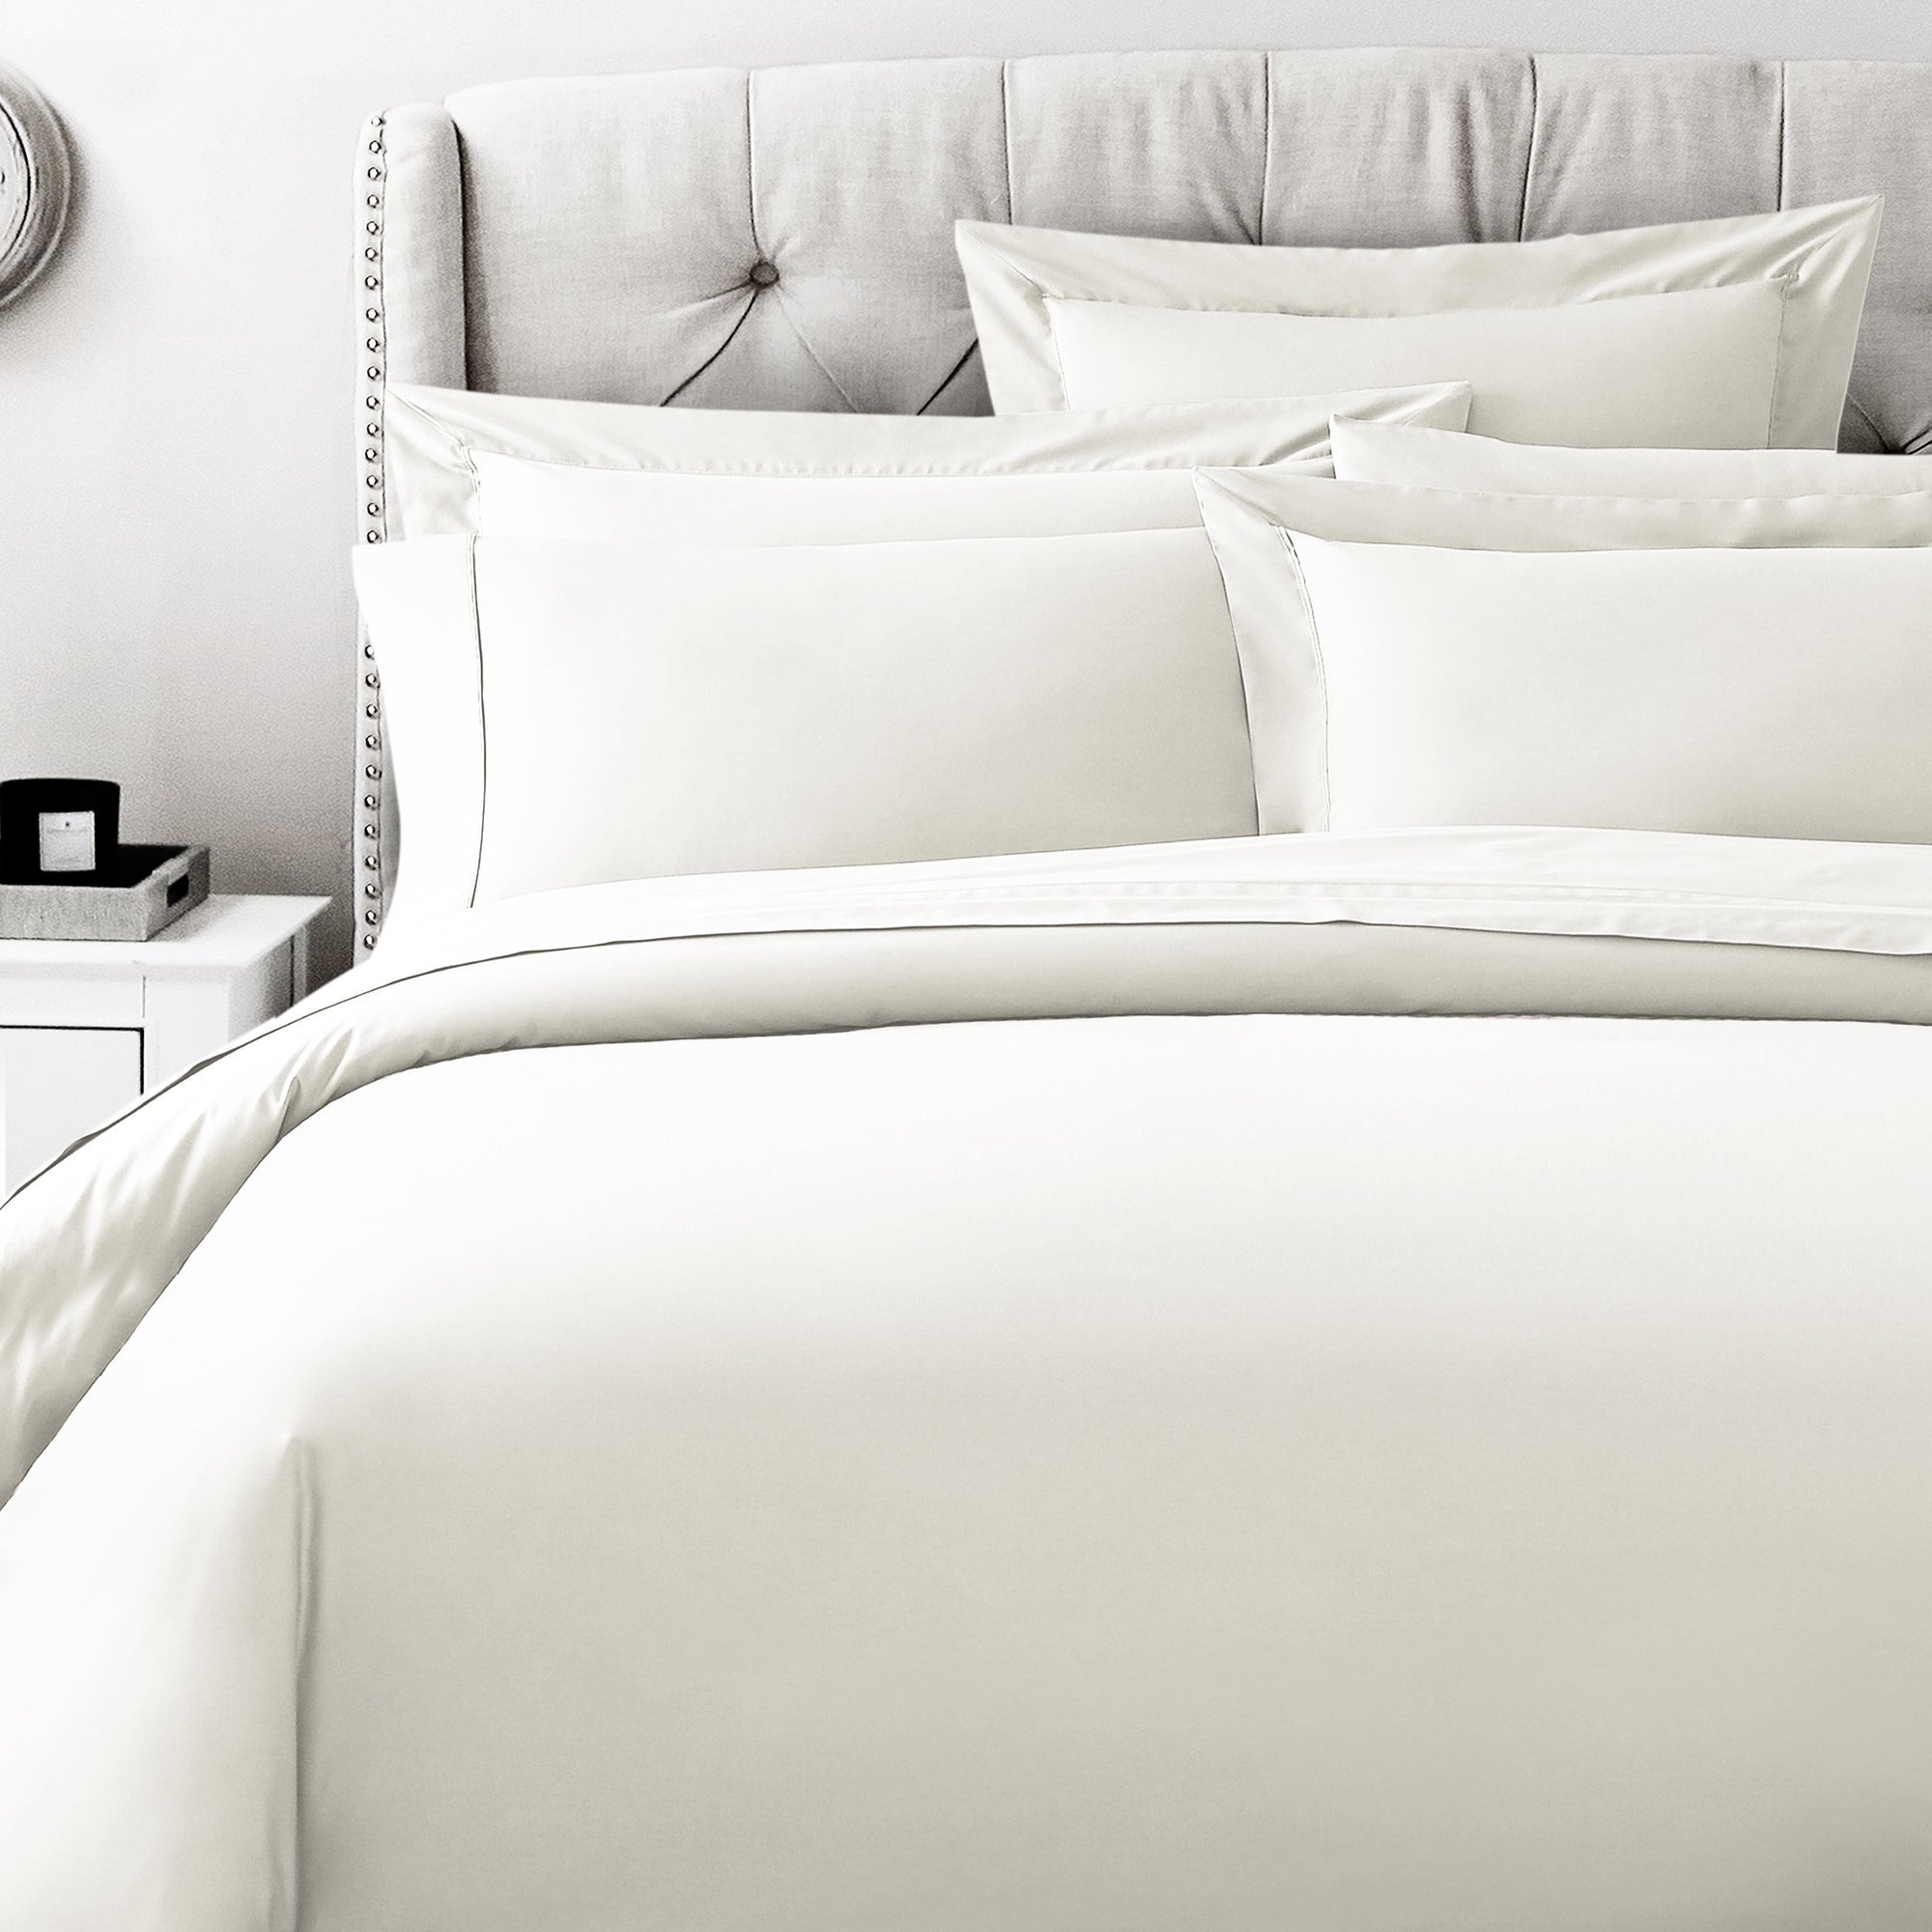 Camelot Luxury Bamboo Duvet Cover  Shop Luxury Bedding and Bath at Luxor  Linens